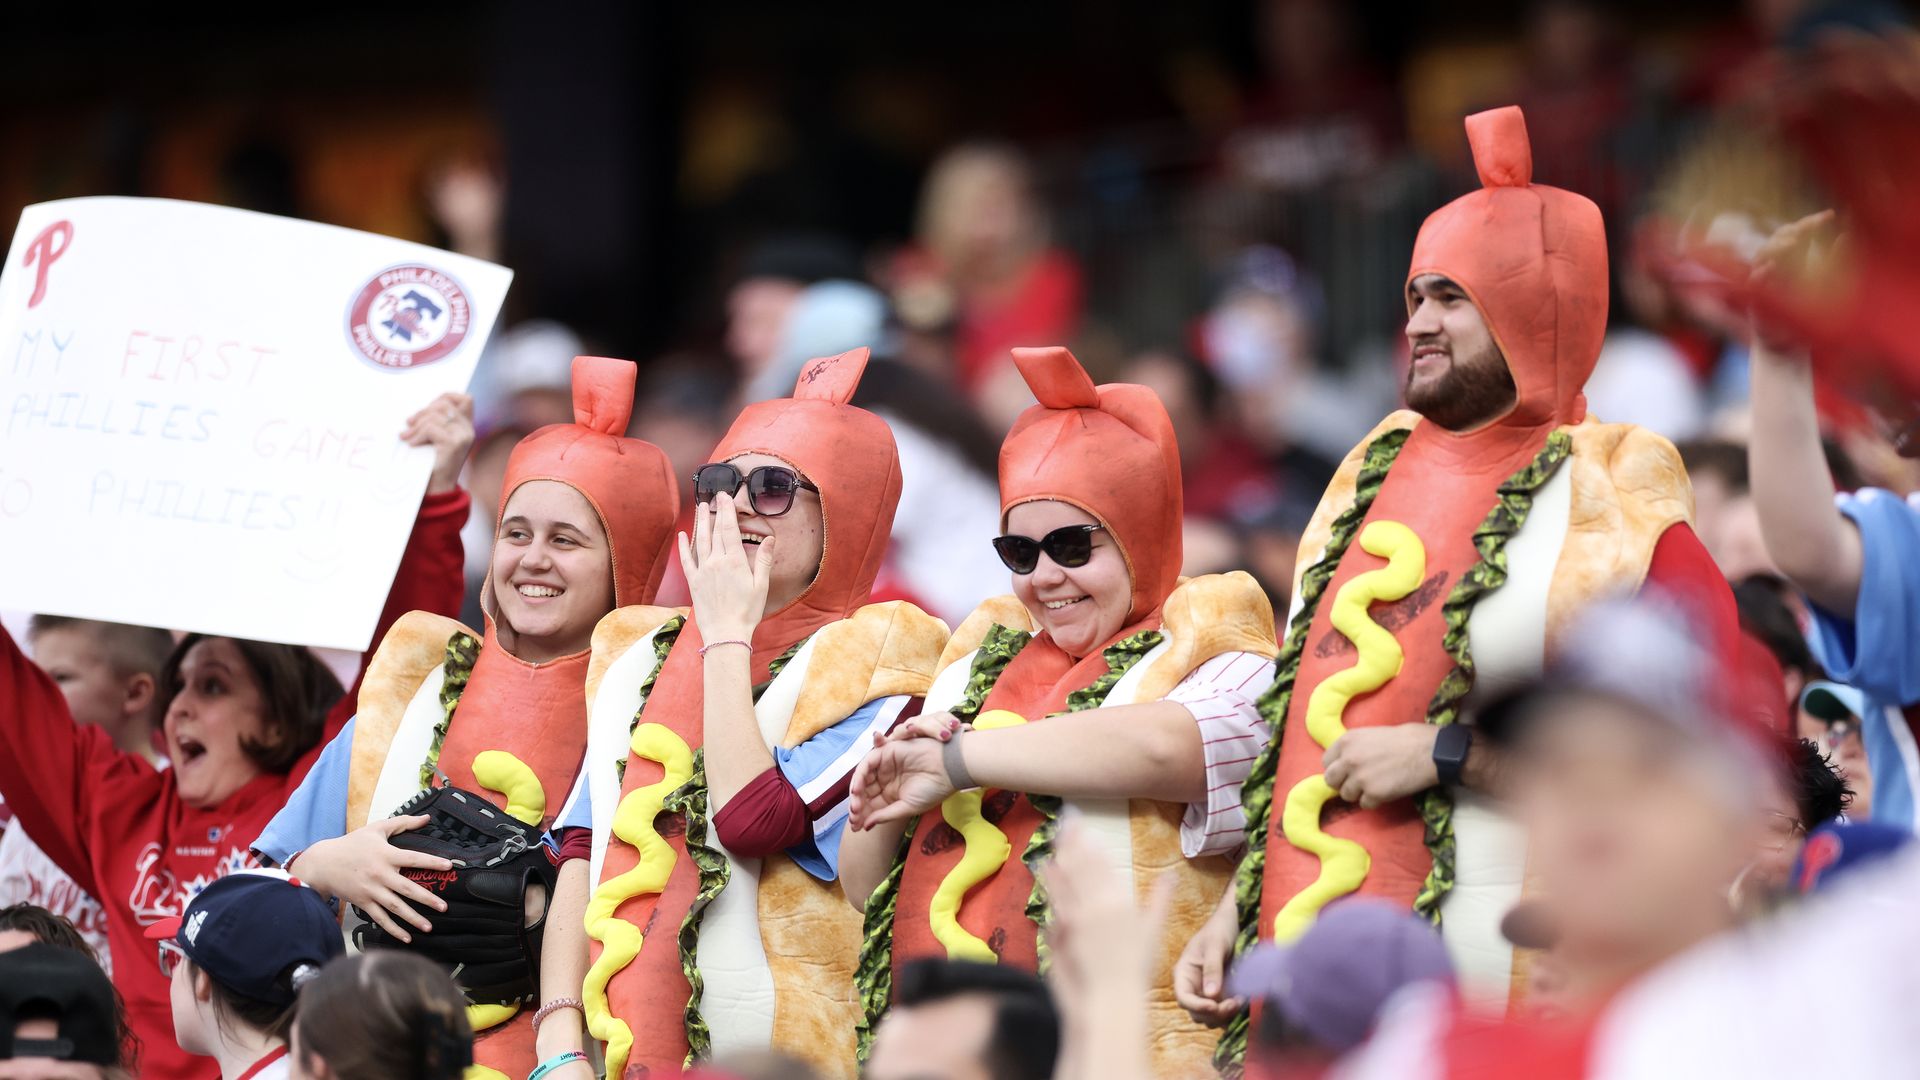 Fans dressed in hot-dog costumes during a Phillies game at Citizens Bank Park.